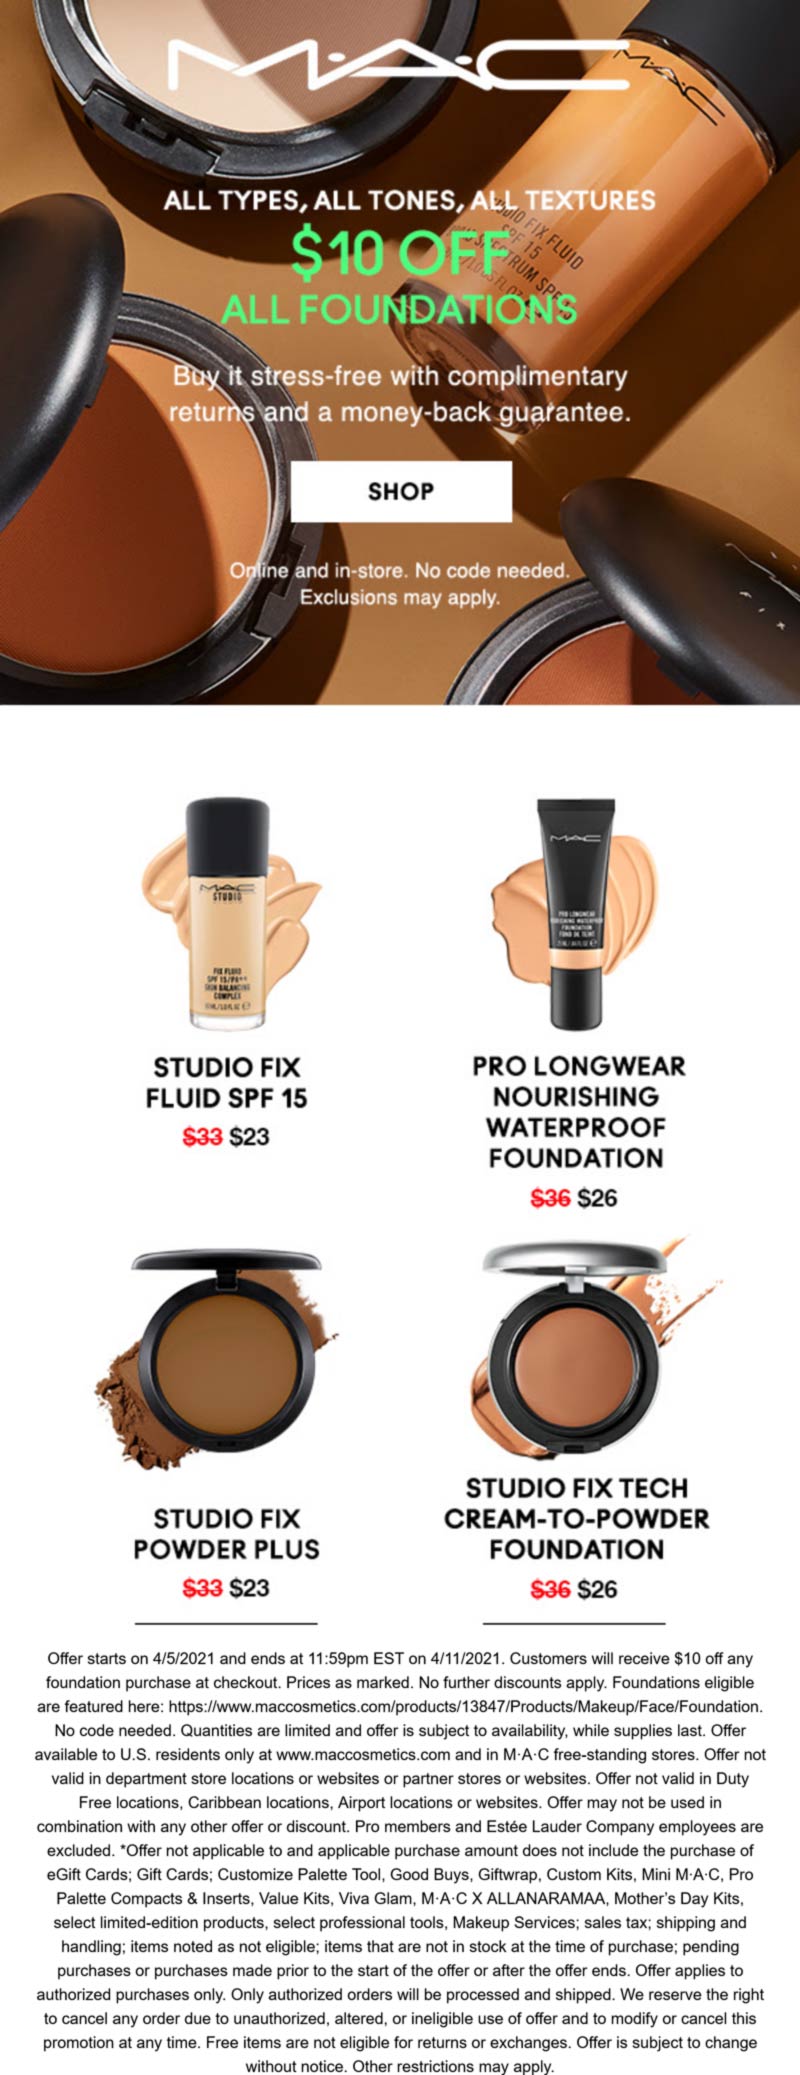 MAC stores Coupon  $10 off all foundations today at MAC cosmetics, ditto online #mac 